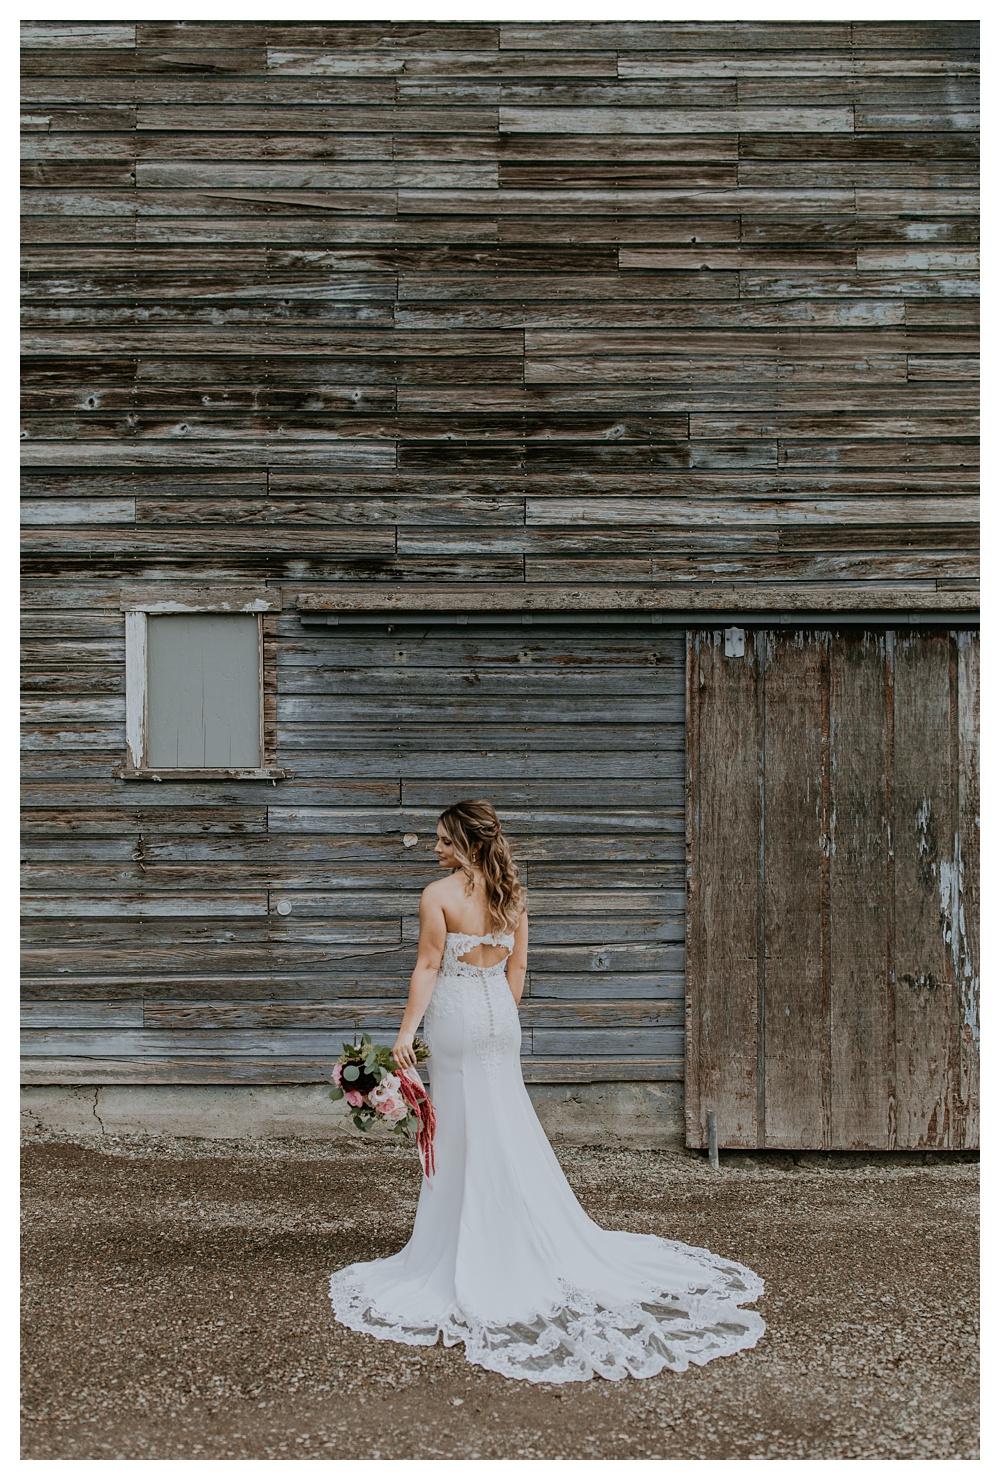 Bride's back side of dress detail while standing in front of the rustic barn at Mount Peak Farm in Washington State Washington State Wedding Photographer, Mount Peak Wedding Venue, PNW Wedding Photographer